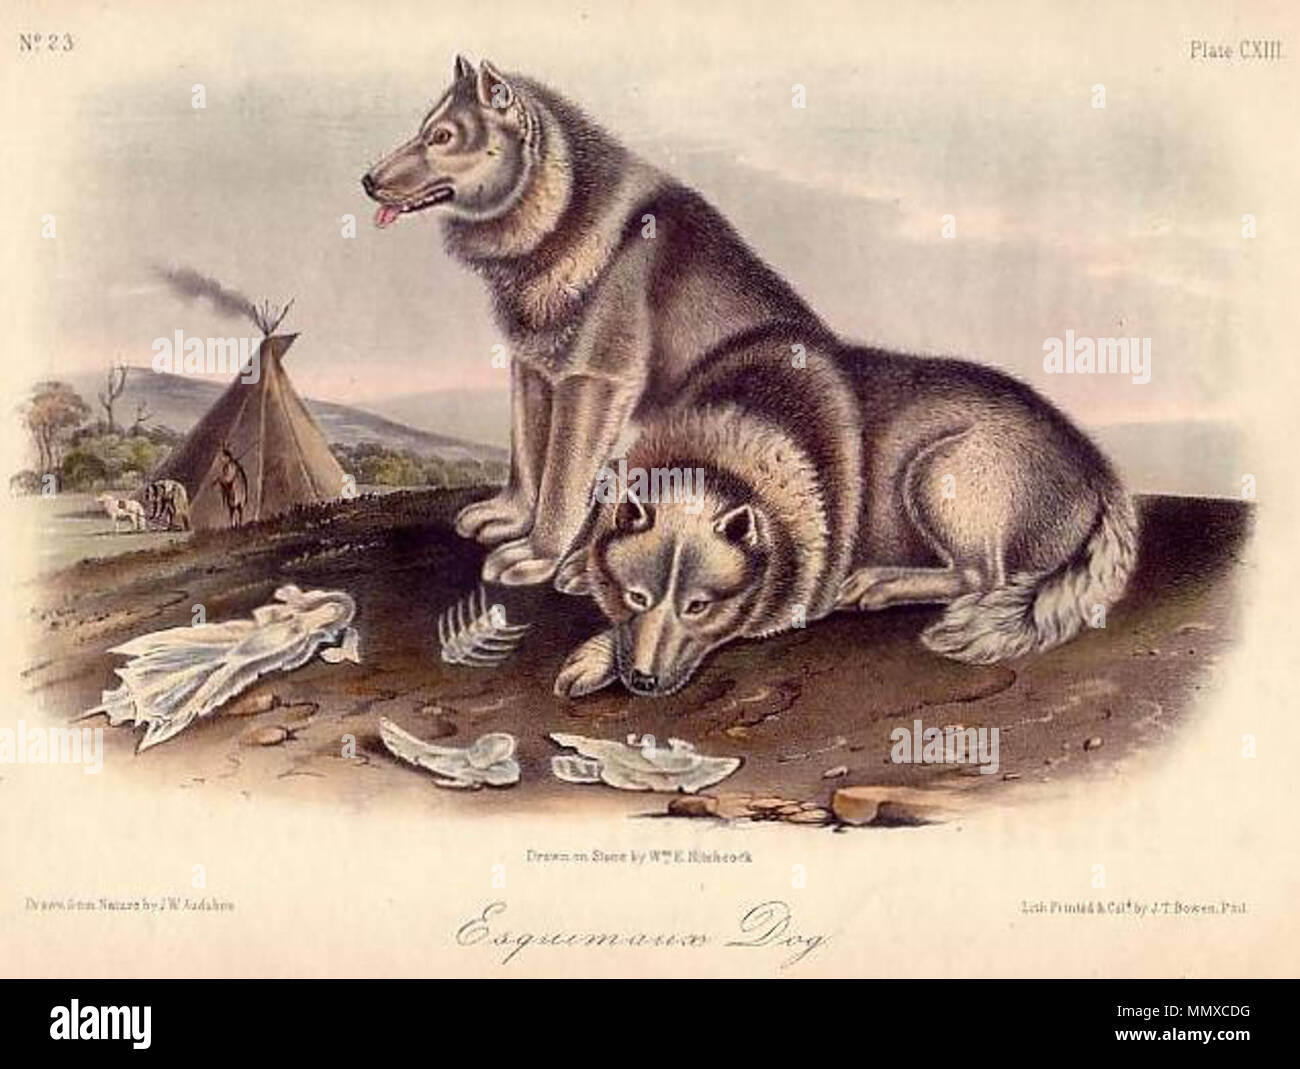 . English: An illustration of a Canadian Eskimo Dog from The Quadrupeds of North America by John James Audubon and John Bachman, originally published in three volumes (1845-1848)  . between 1845 and 1848.   John James Audubon  (1785–1851)       Alternative names Birth name: Jean-Jacques-Fougère Audubon  Description American ornithologist, naturalist, hunter and painter  Date of birth/death 26 April 1785 27 January 1851  Location of birth/death Les Cayes (Haiti) New York City  Work location Louisville, New Orleans, New York City, Florida  Authority control  : Q182882 VIAF:?14765625 ISNI:?0000 0 Stock Photo